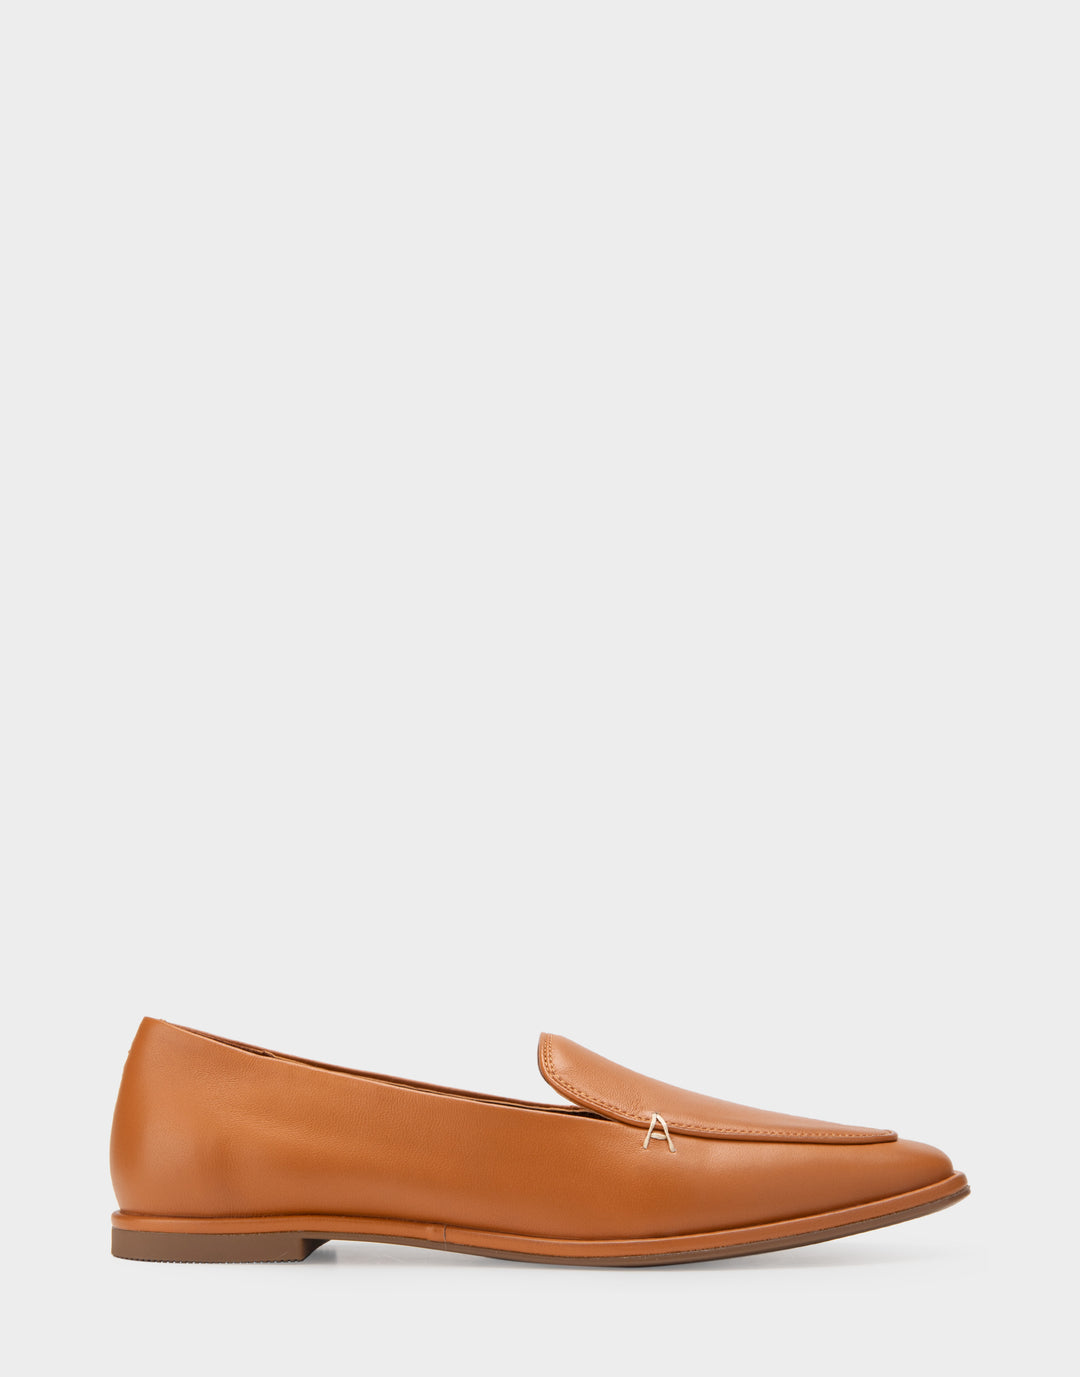 Neo - Comfortable Women’s Loafer In Tan